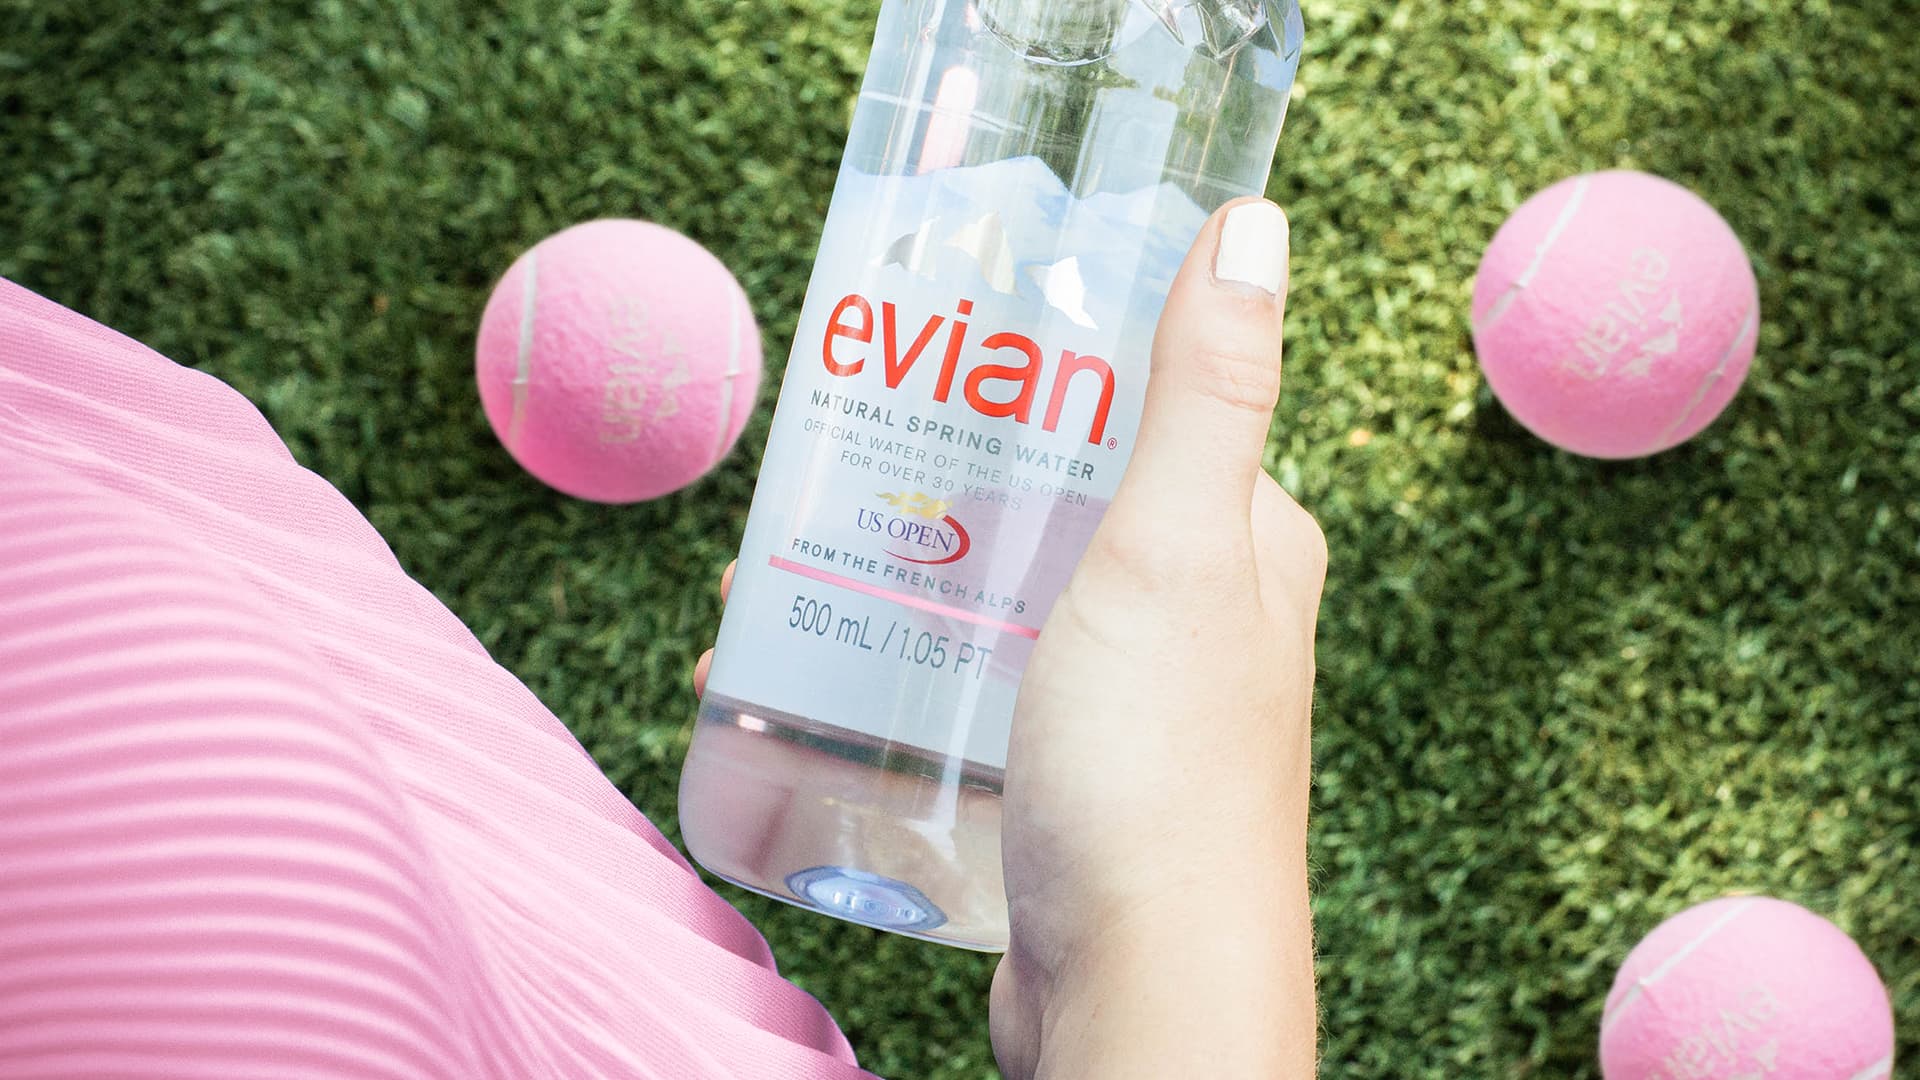 Evian US Open bottle in a woman's hand looking down at pink tennis balls and fresh cut grass